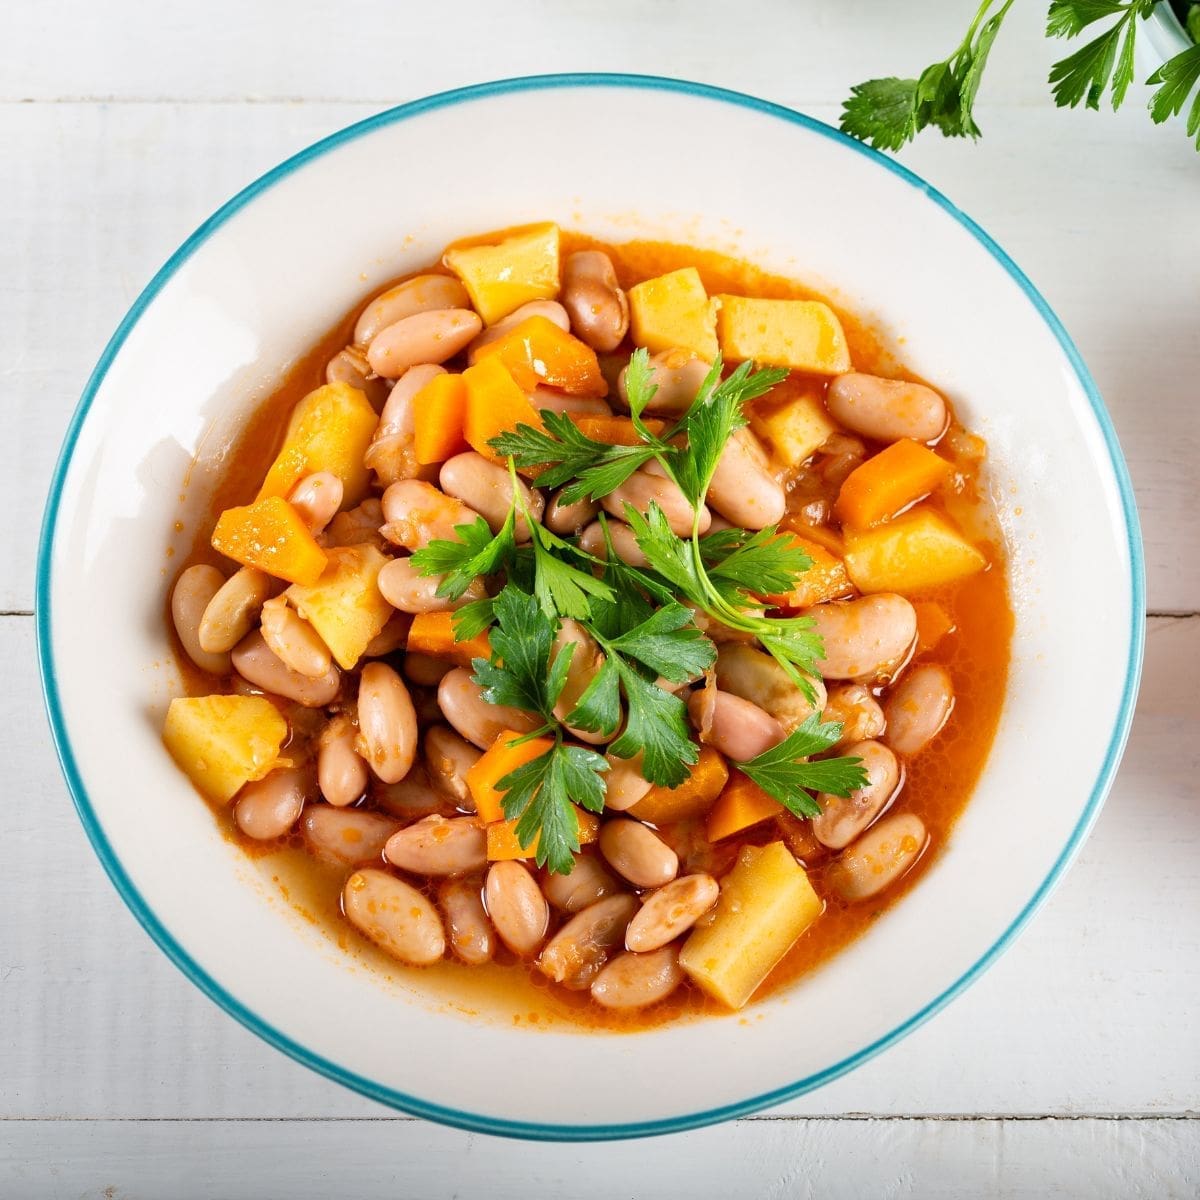 11 Easy Pinto Bean Recipes: From Soups To Salads